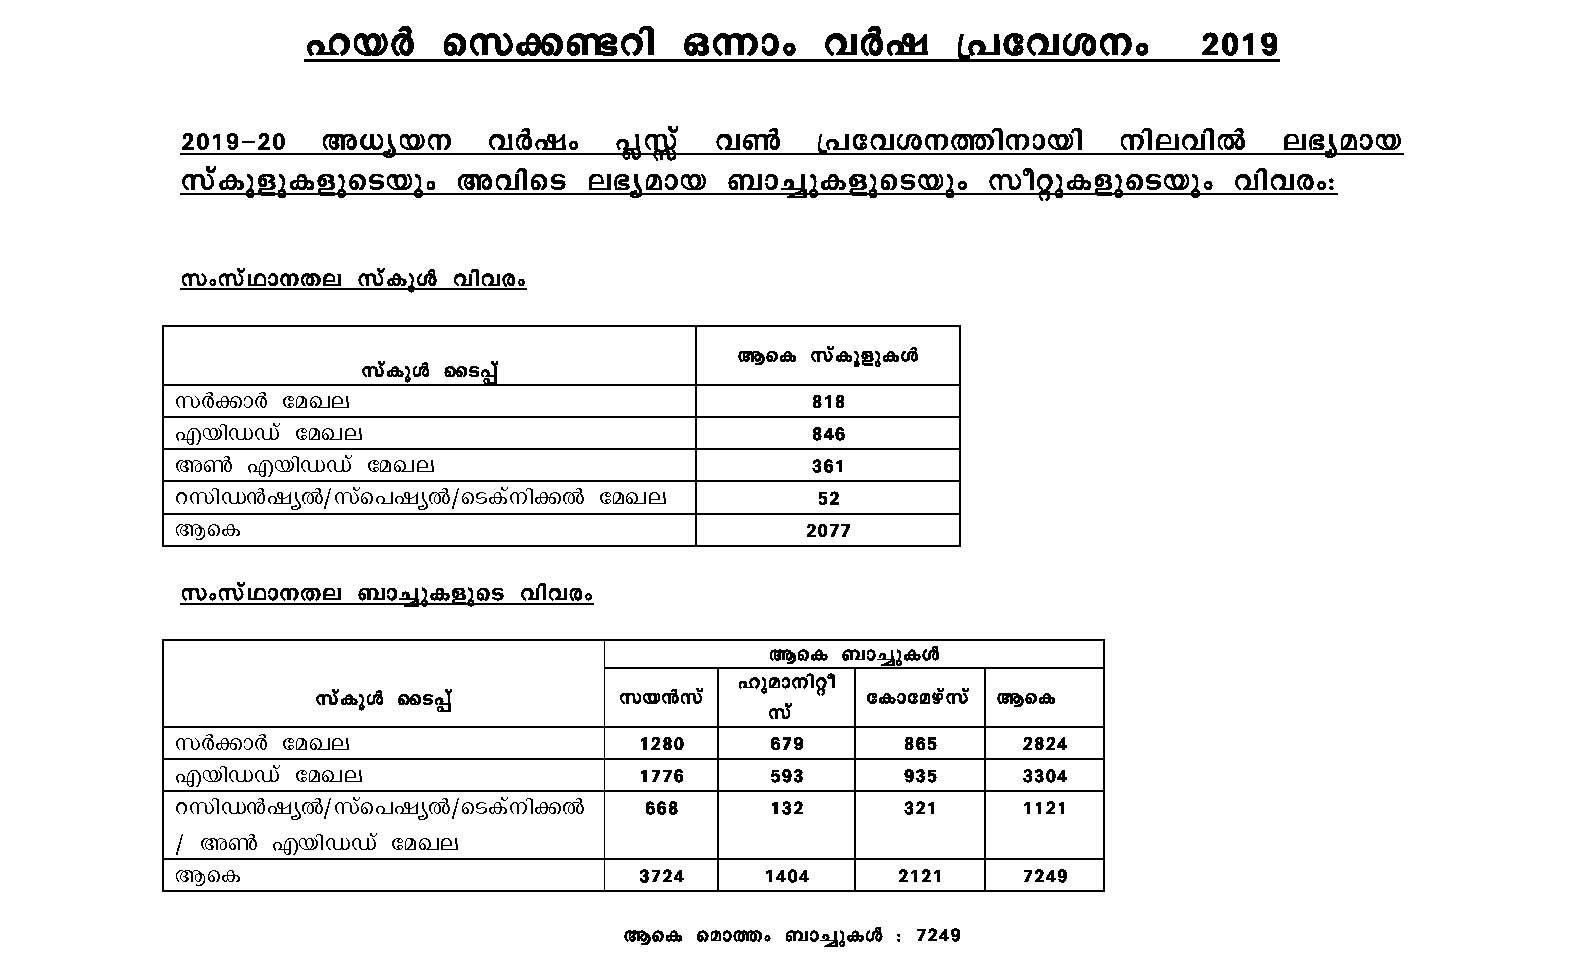 Plus 1 Seat Availability in Schools of Kerala for 2018 2019 Batch - Notification Image 1